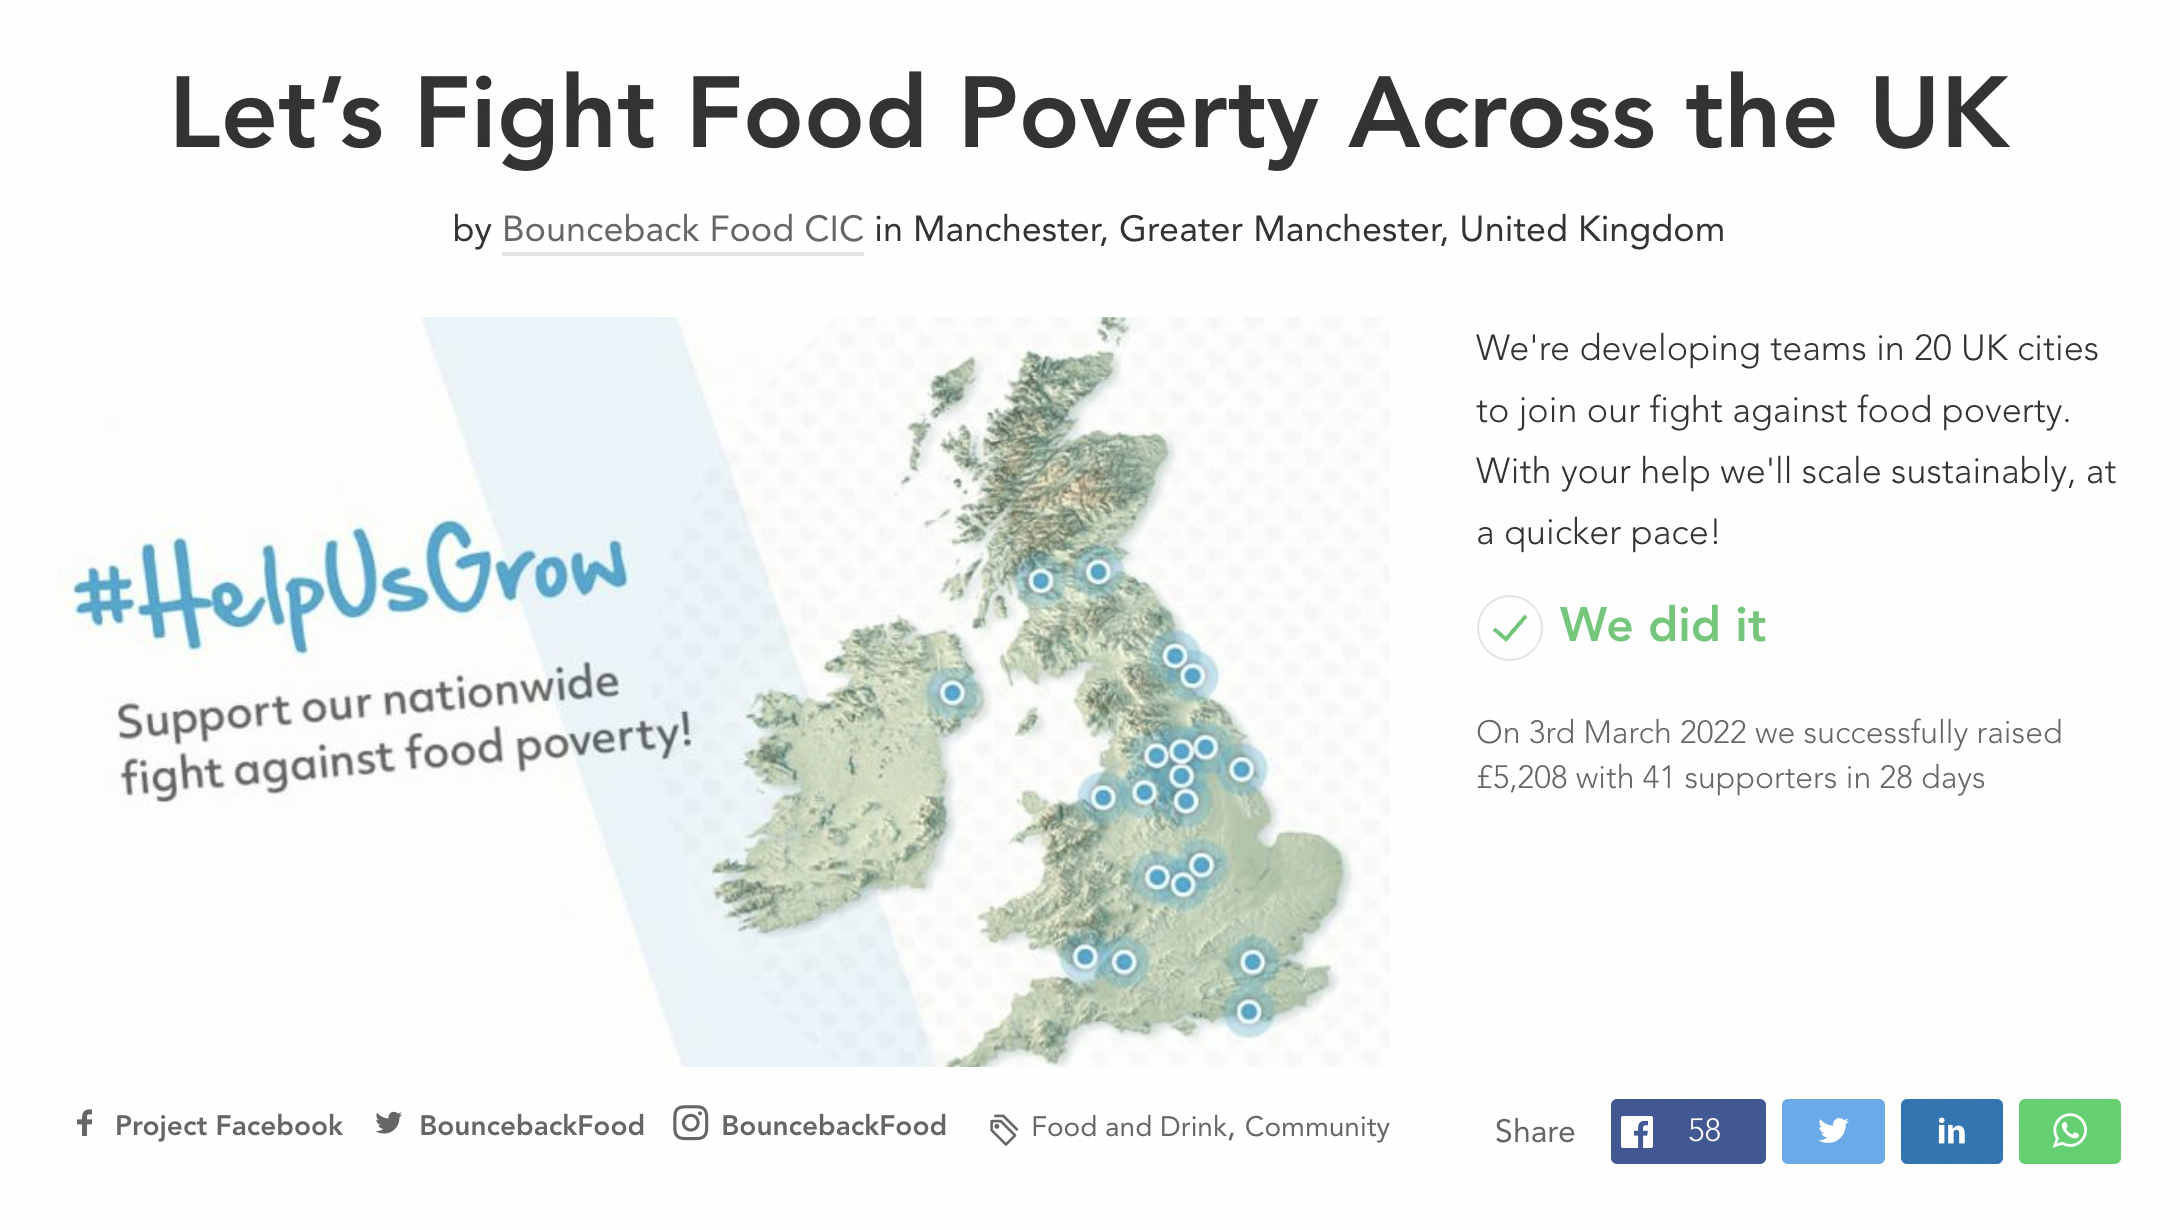 A picture of the Bounceback Food crowdfunding campaign website for the Help Us Grow campaign.